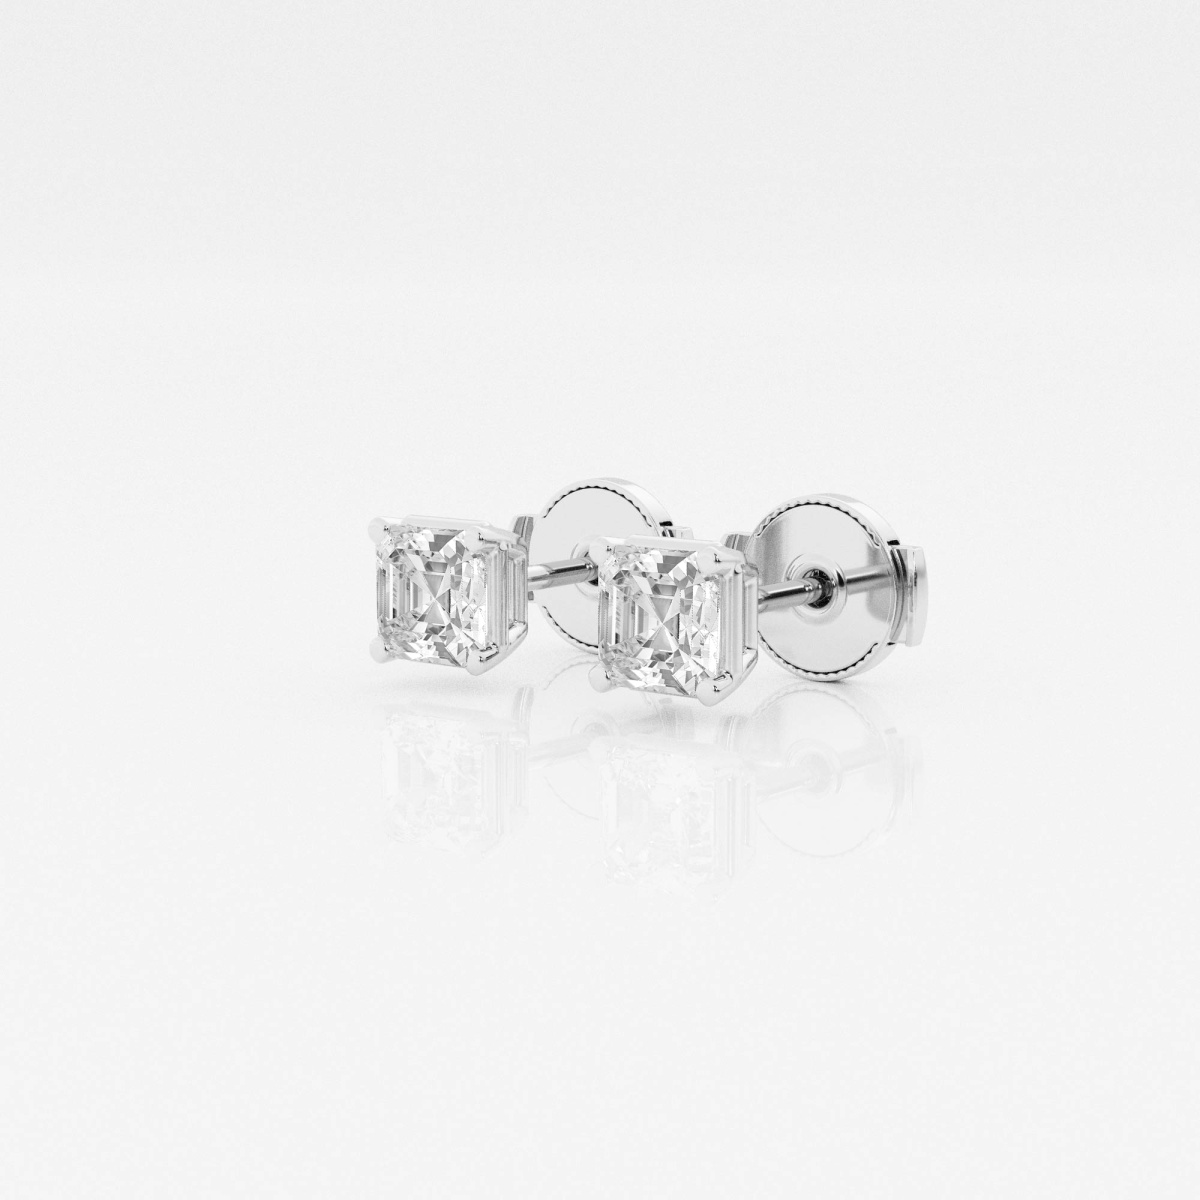 Additional Image 1 for  1 ctw Asscher Lab Grown Diamond Solitaire Stud Earrings